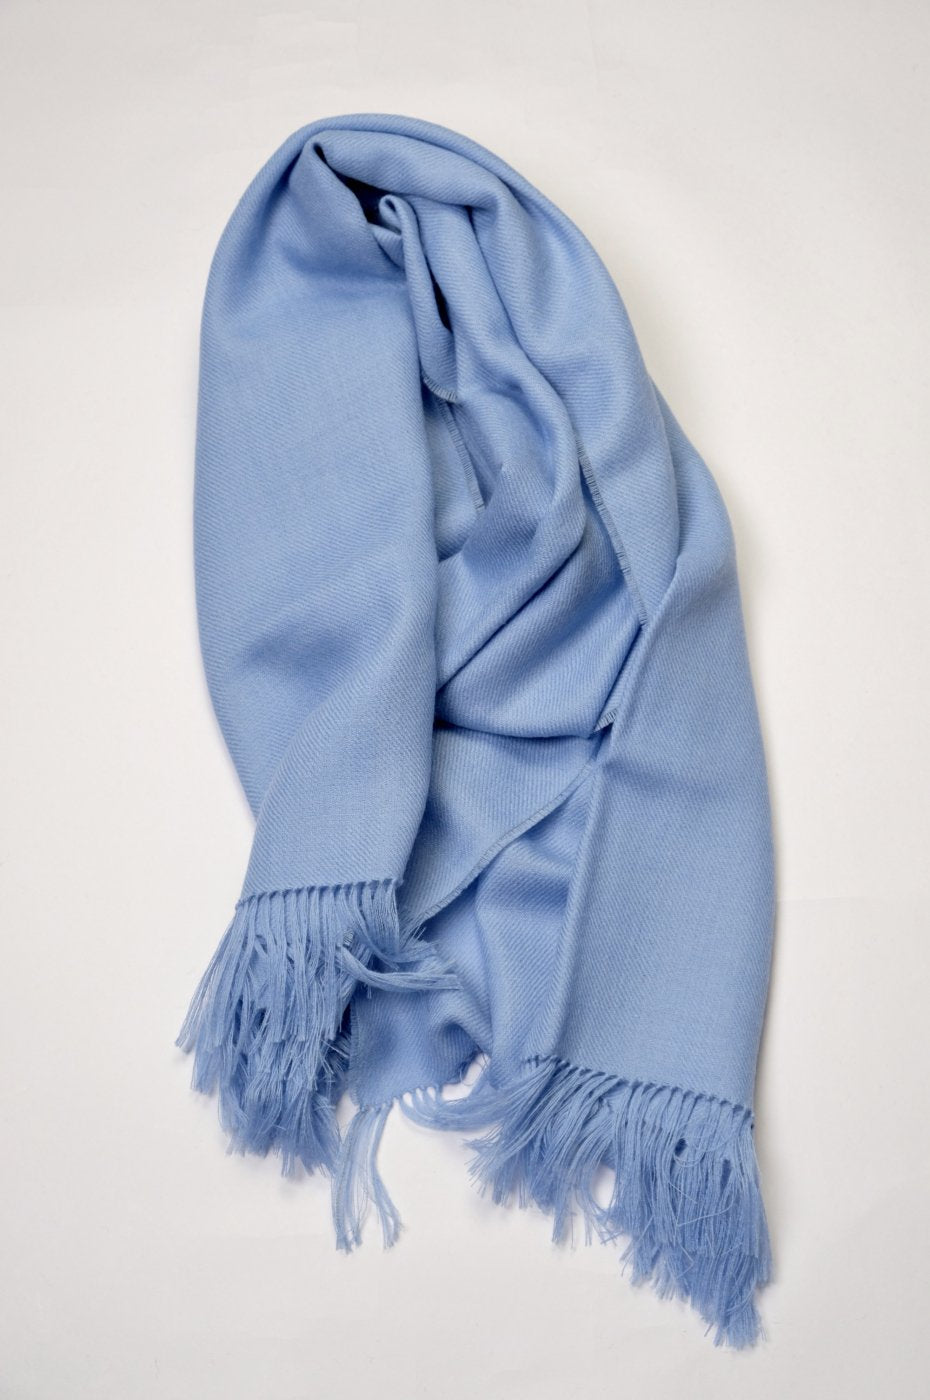 THE INOUE BROTHERS... "NON BRUSHED LARGE STOLE / BABY BLUE"